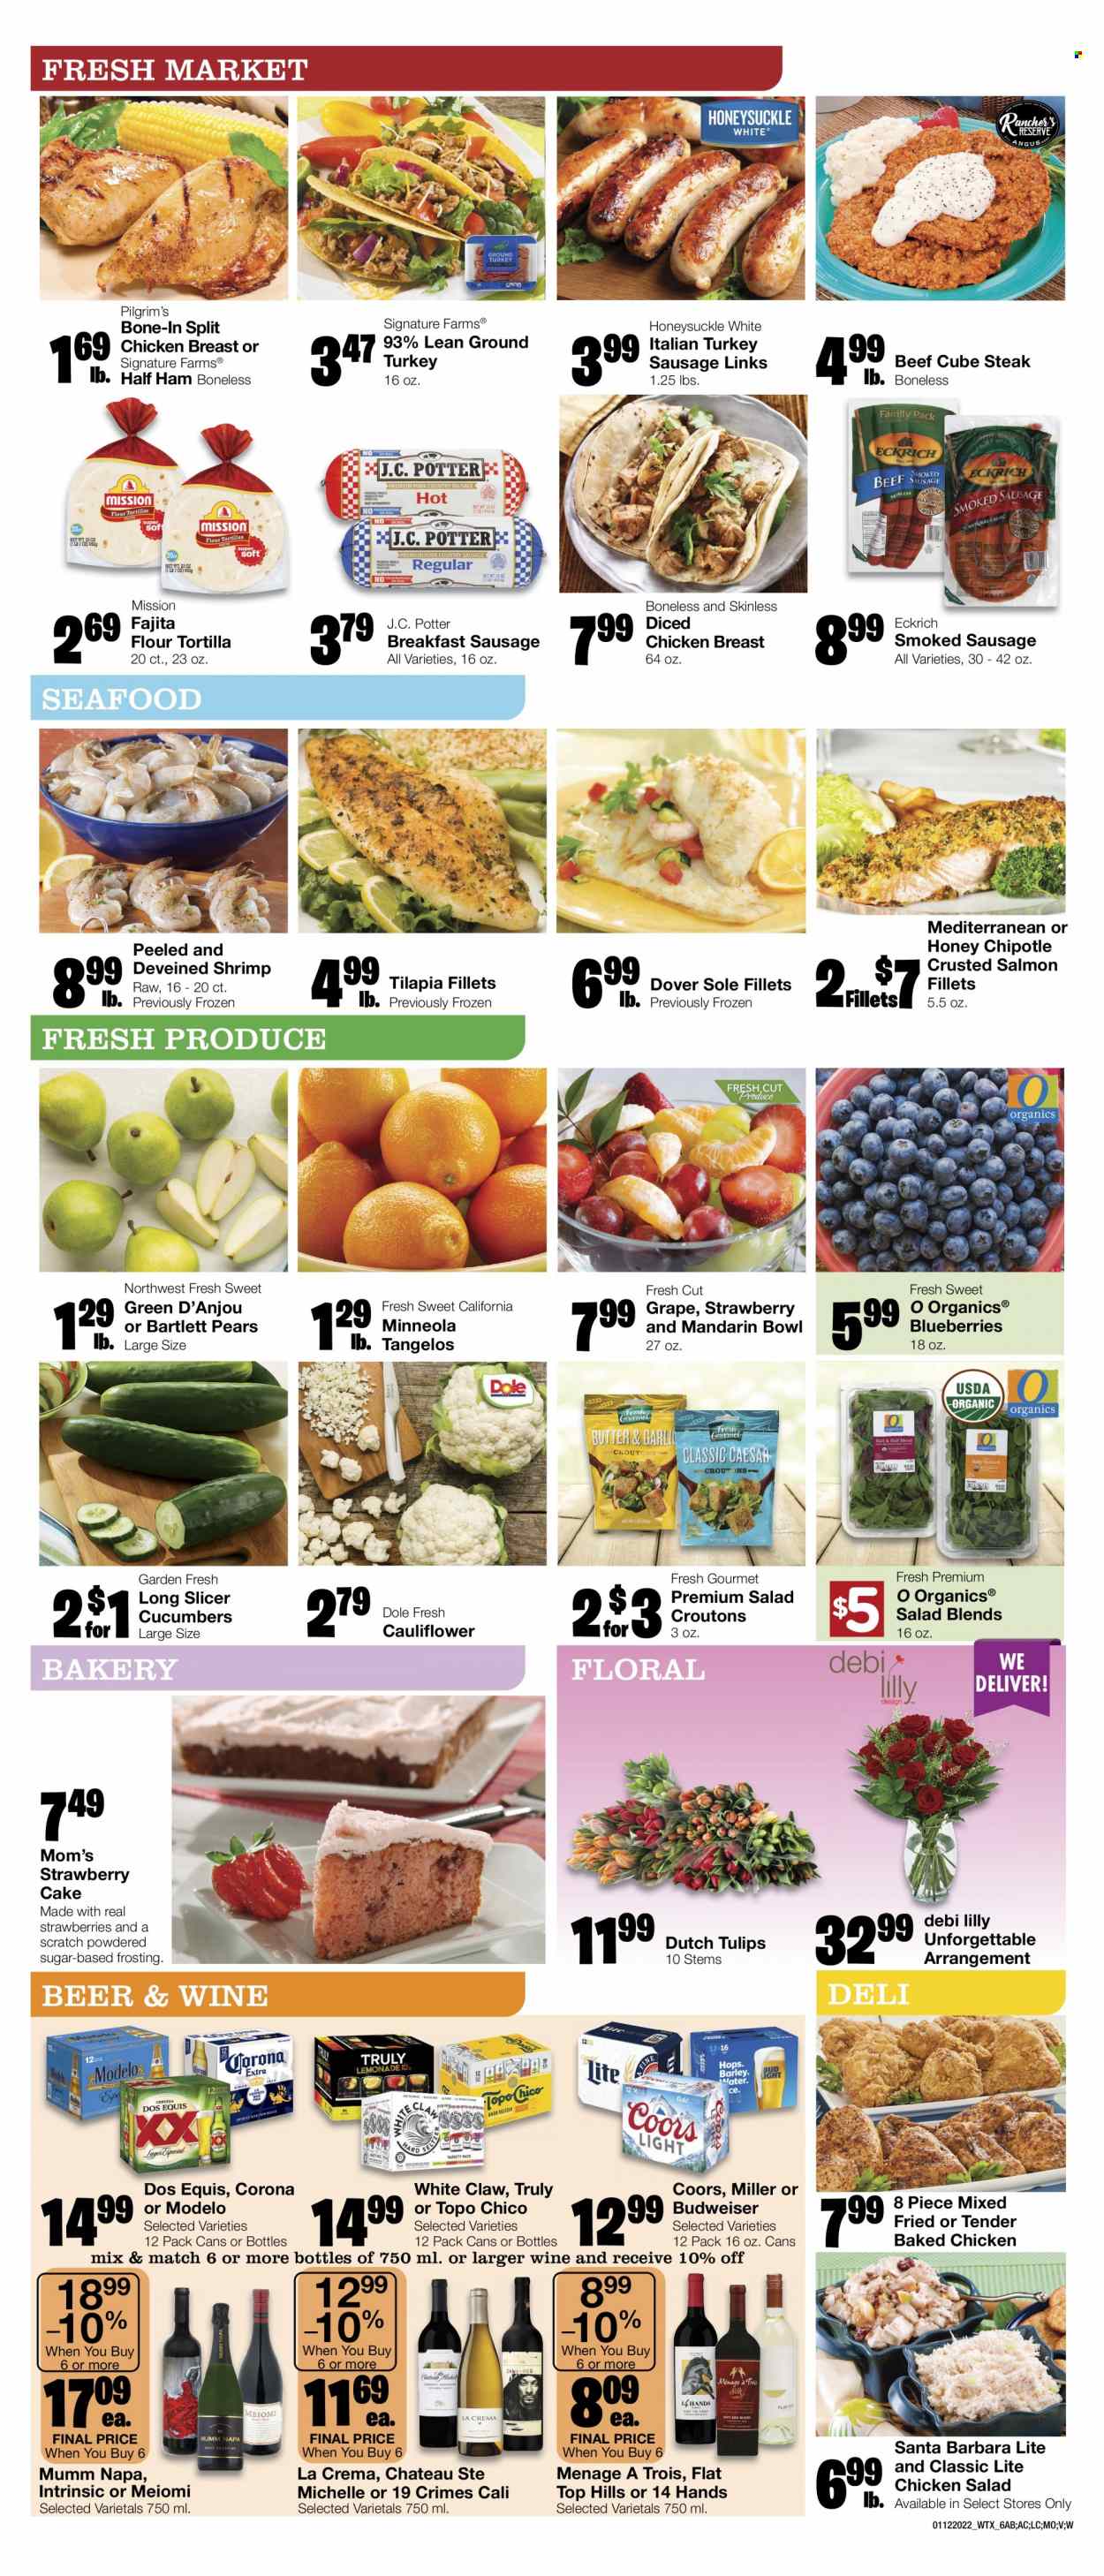 thumbnail - United Supermarkets Flyer - 01/12/2022 - 01/18/2022 - Sales products - Bartlett pears, tangelos, tortillas, cake, cauliflower, cucumber, salad, Dole, mandarines, pears, ground turkey, chicken breasts, steak, salmon, salmon fillet, tilapia, seafood, shrimps, fajita, half ham, ham, sausage, smoked sausage, italian sausage, chicken salad, Santa, croutons, frosting, sugar, icing sugar, wine, White Claw, TRULY, beer, Corona Extra, Miller, Modelo, slicer, bowl, Hill's, Budweiser, Coors, Dos Equis. Page 6.